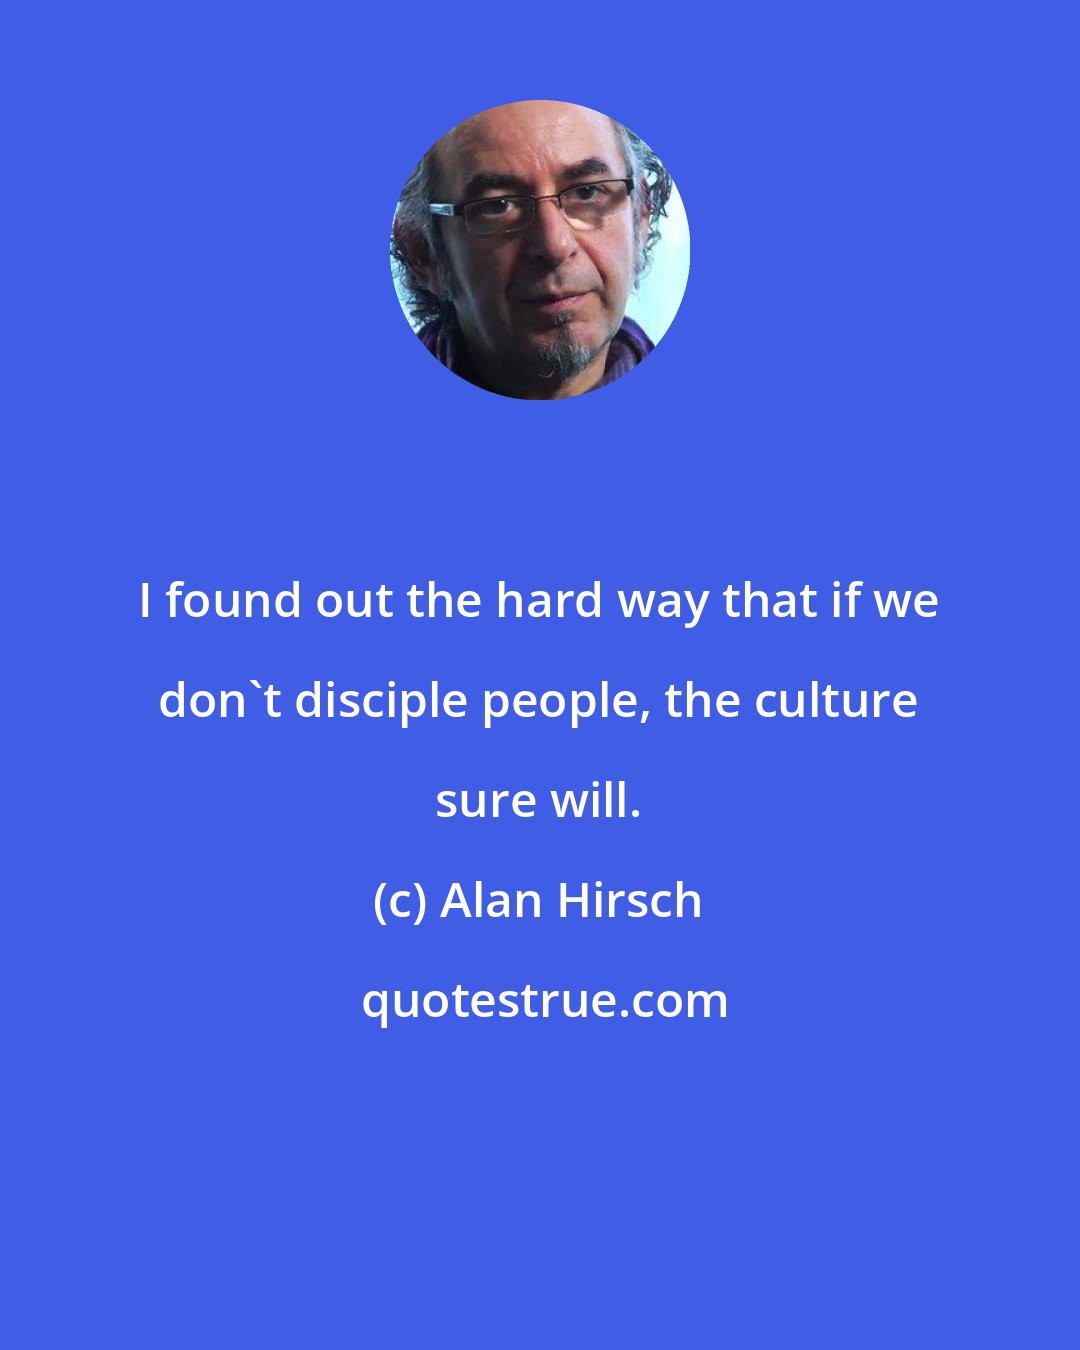 Alan Hirsch: I found out the hard way that if we don't disciple people, the culture sure will.